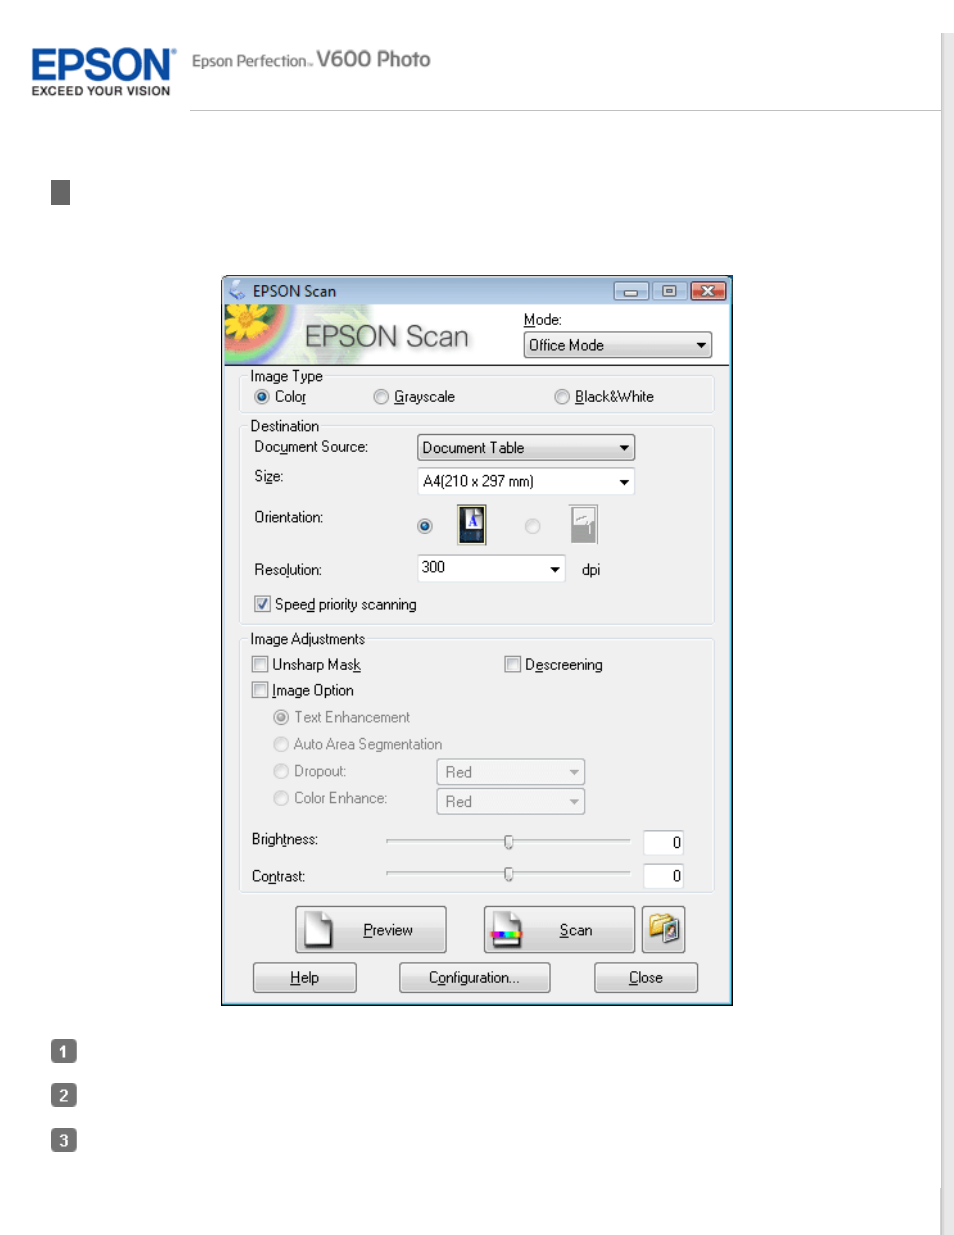 Scanning in office mode, For instructions on making settings in office